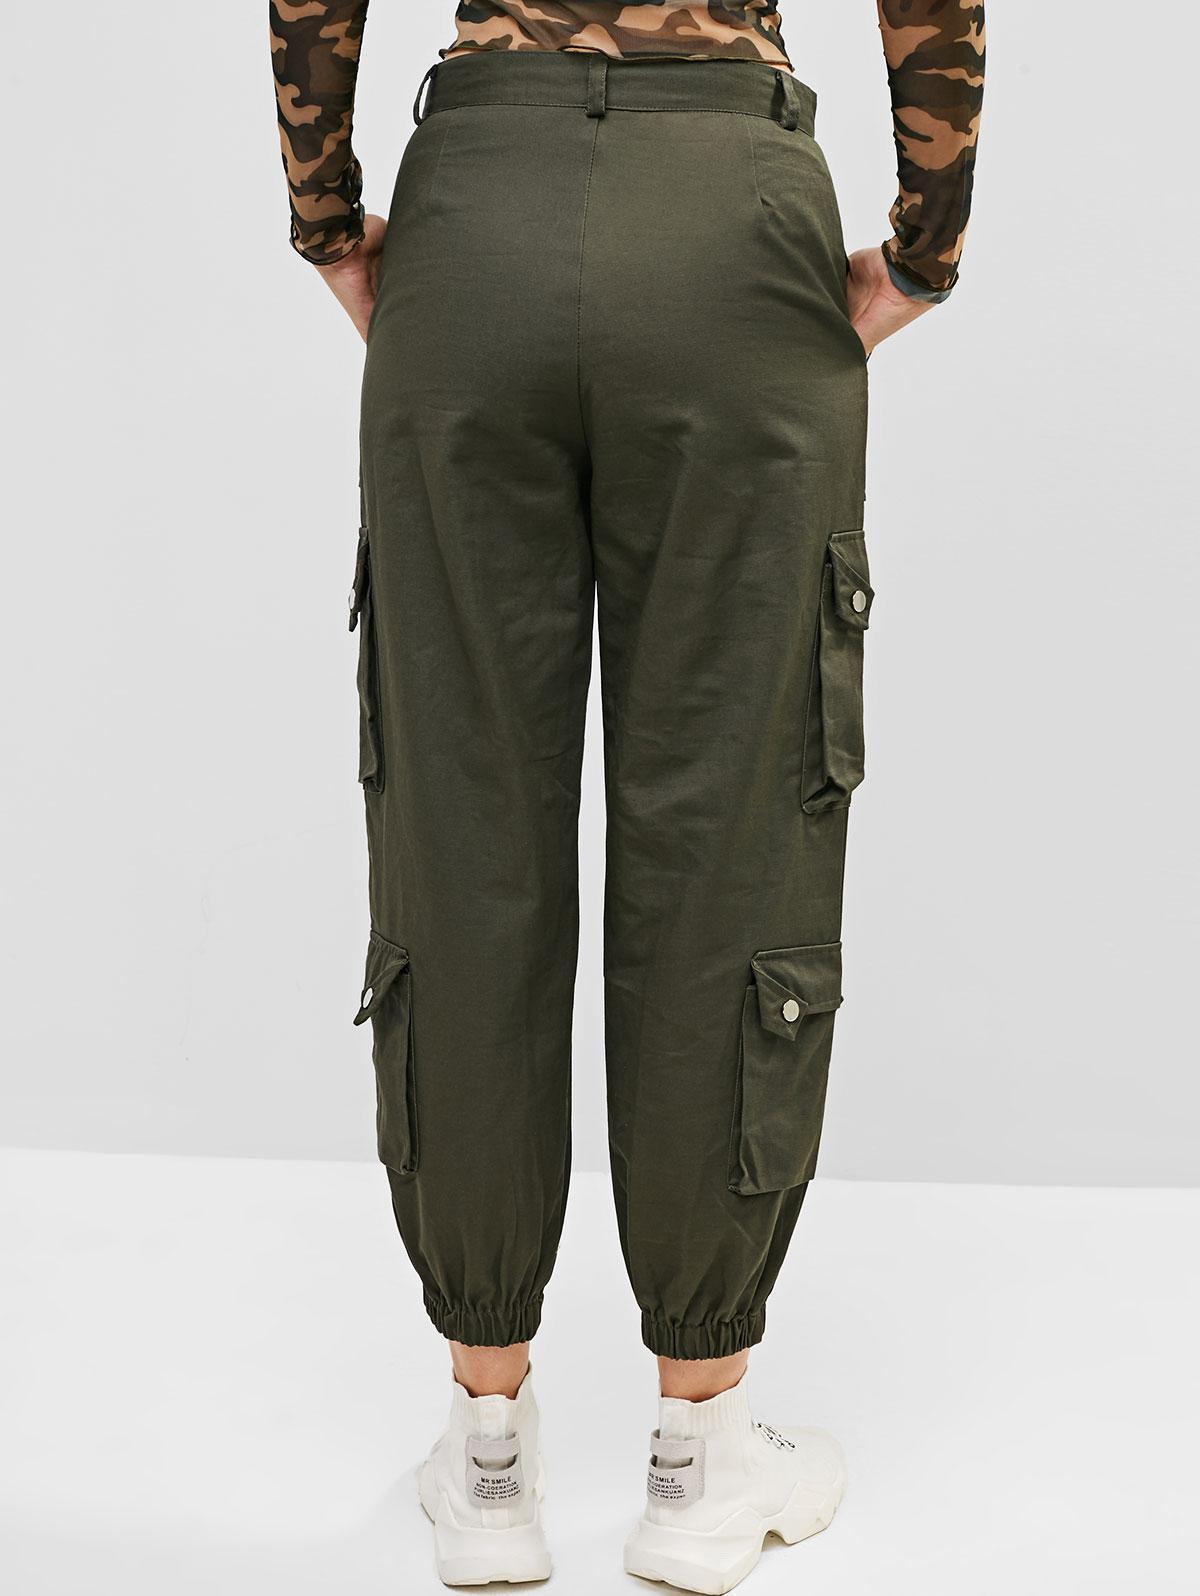 Zaful Plaid Buckle Belted Pocket Cargo Techwear Pants in Black Slacks and Chinos Cargo trousers Womens Clothing Trousers 